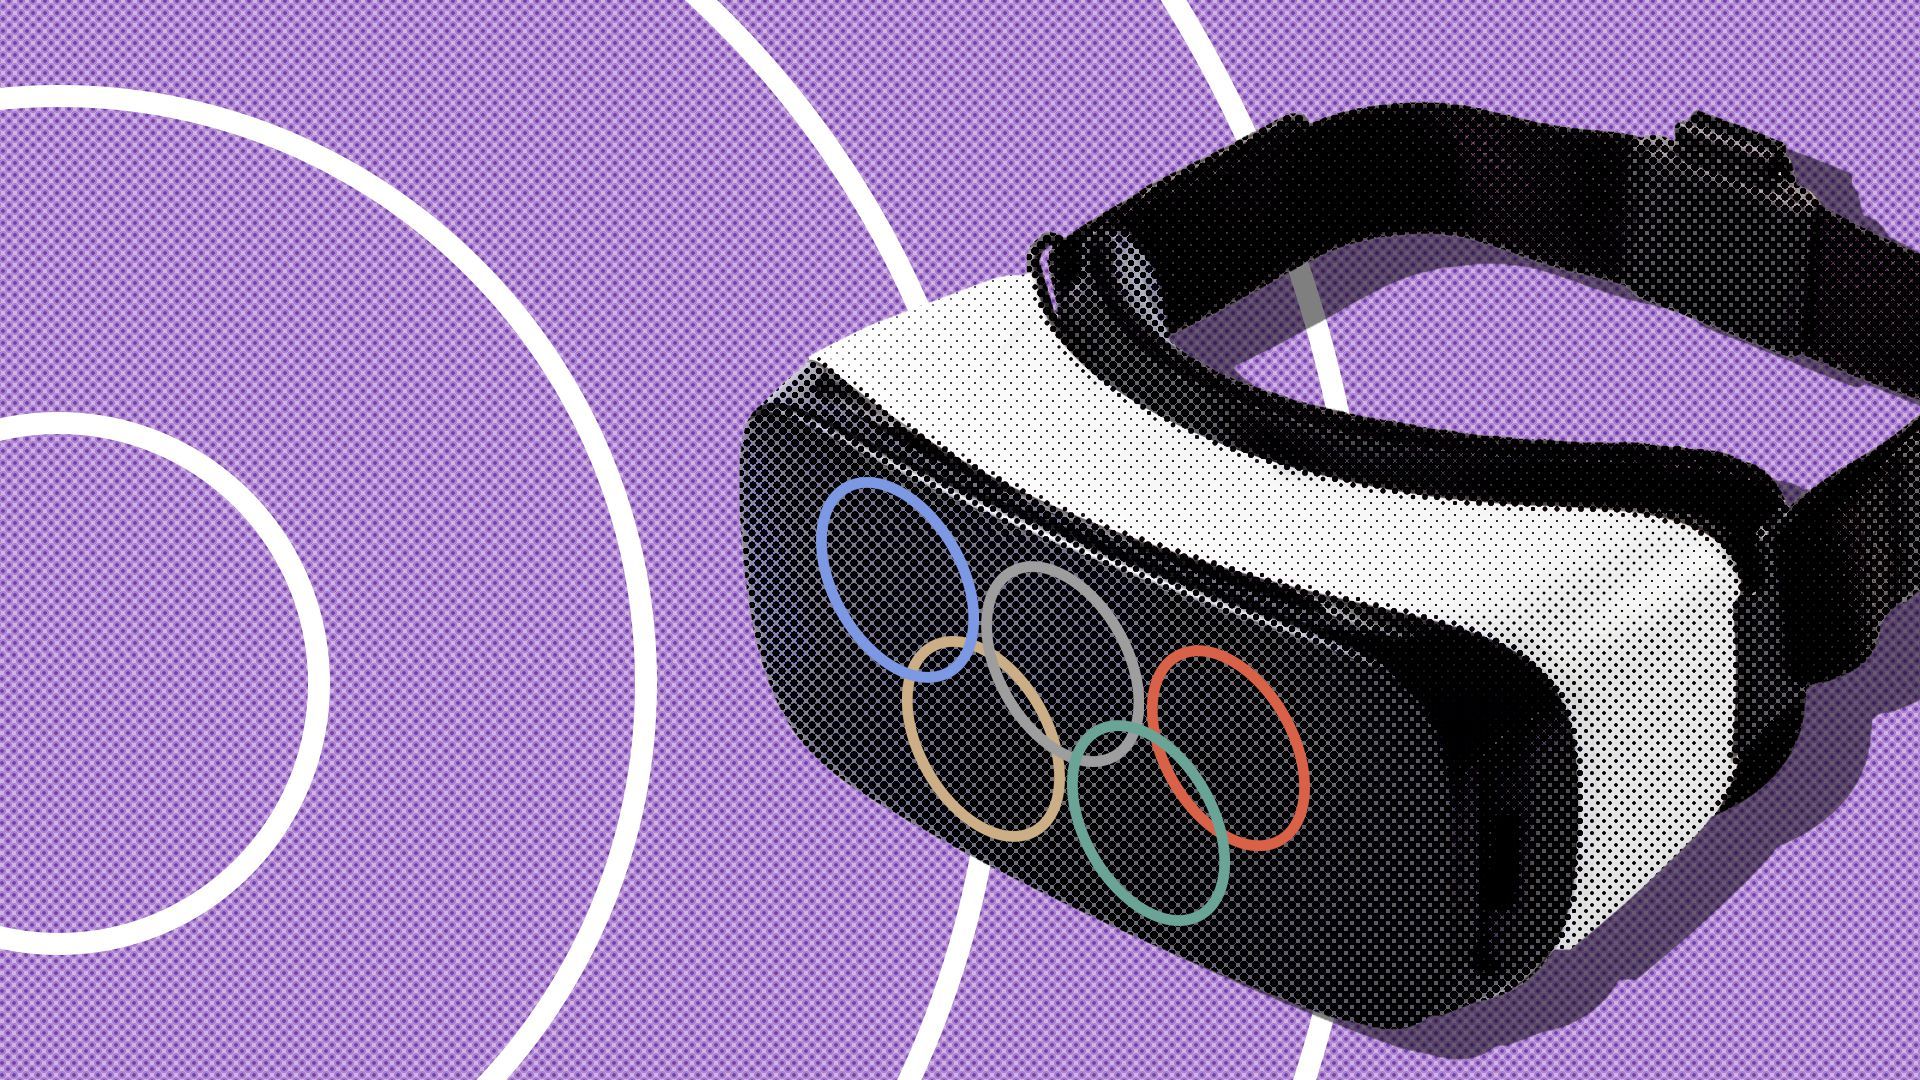 Illustration of a VR headset with the Olympics logo on the front.